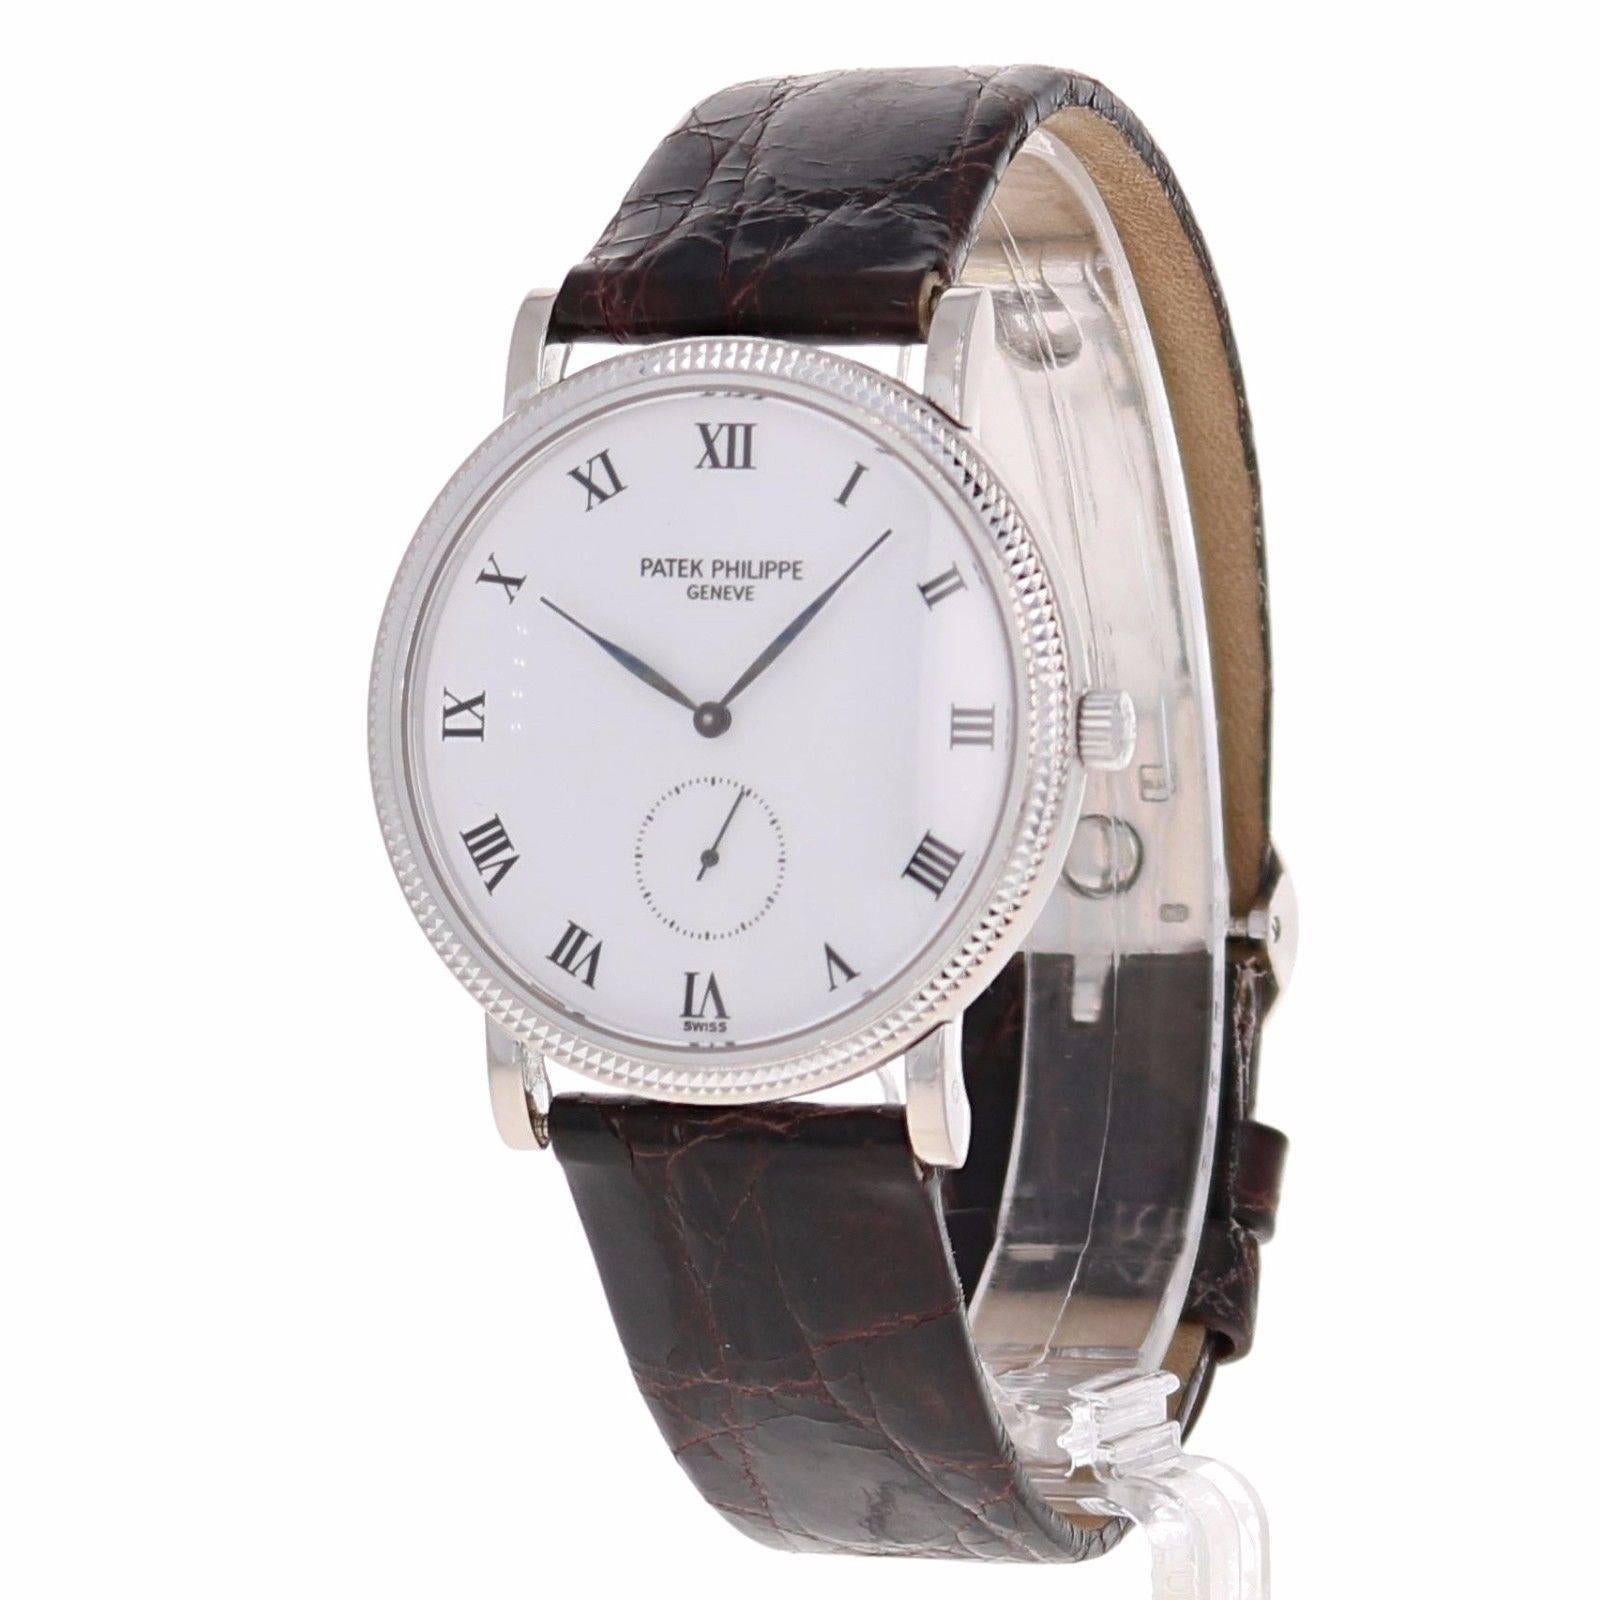 
Brand Name: Patek Philippe
Style Number: 3919G
Also Called: 3919 G
Series: Calatrava

Case Material: 18k
Dial Color: White with Roman Numerals
Movement: 18k 
Functions	: Hours, Minutes, Seconds
Crystal Material: Sapphire
Case Diameter: